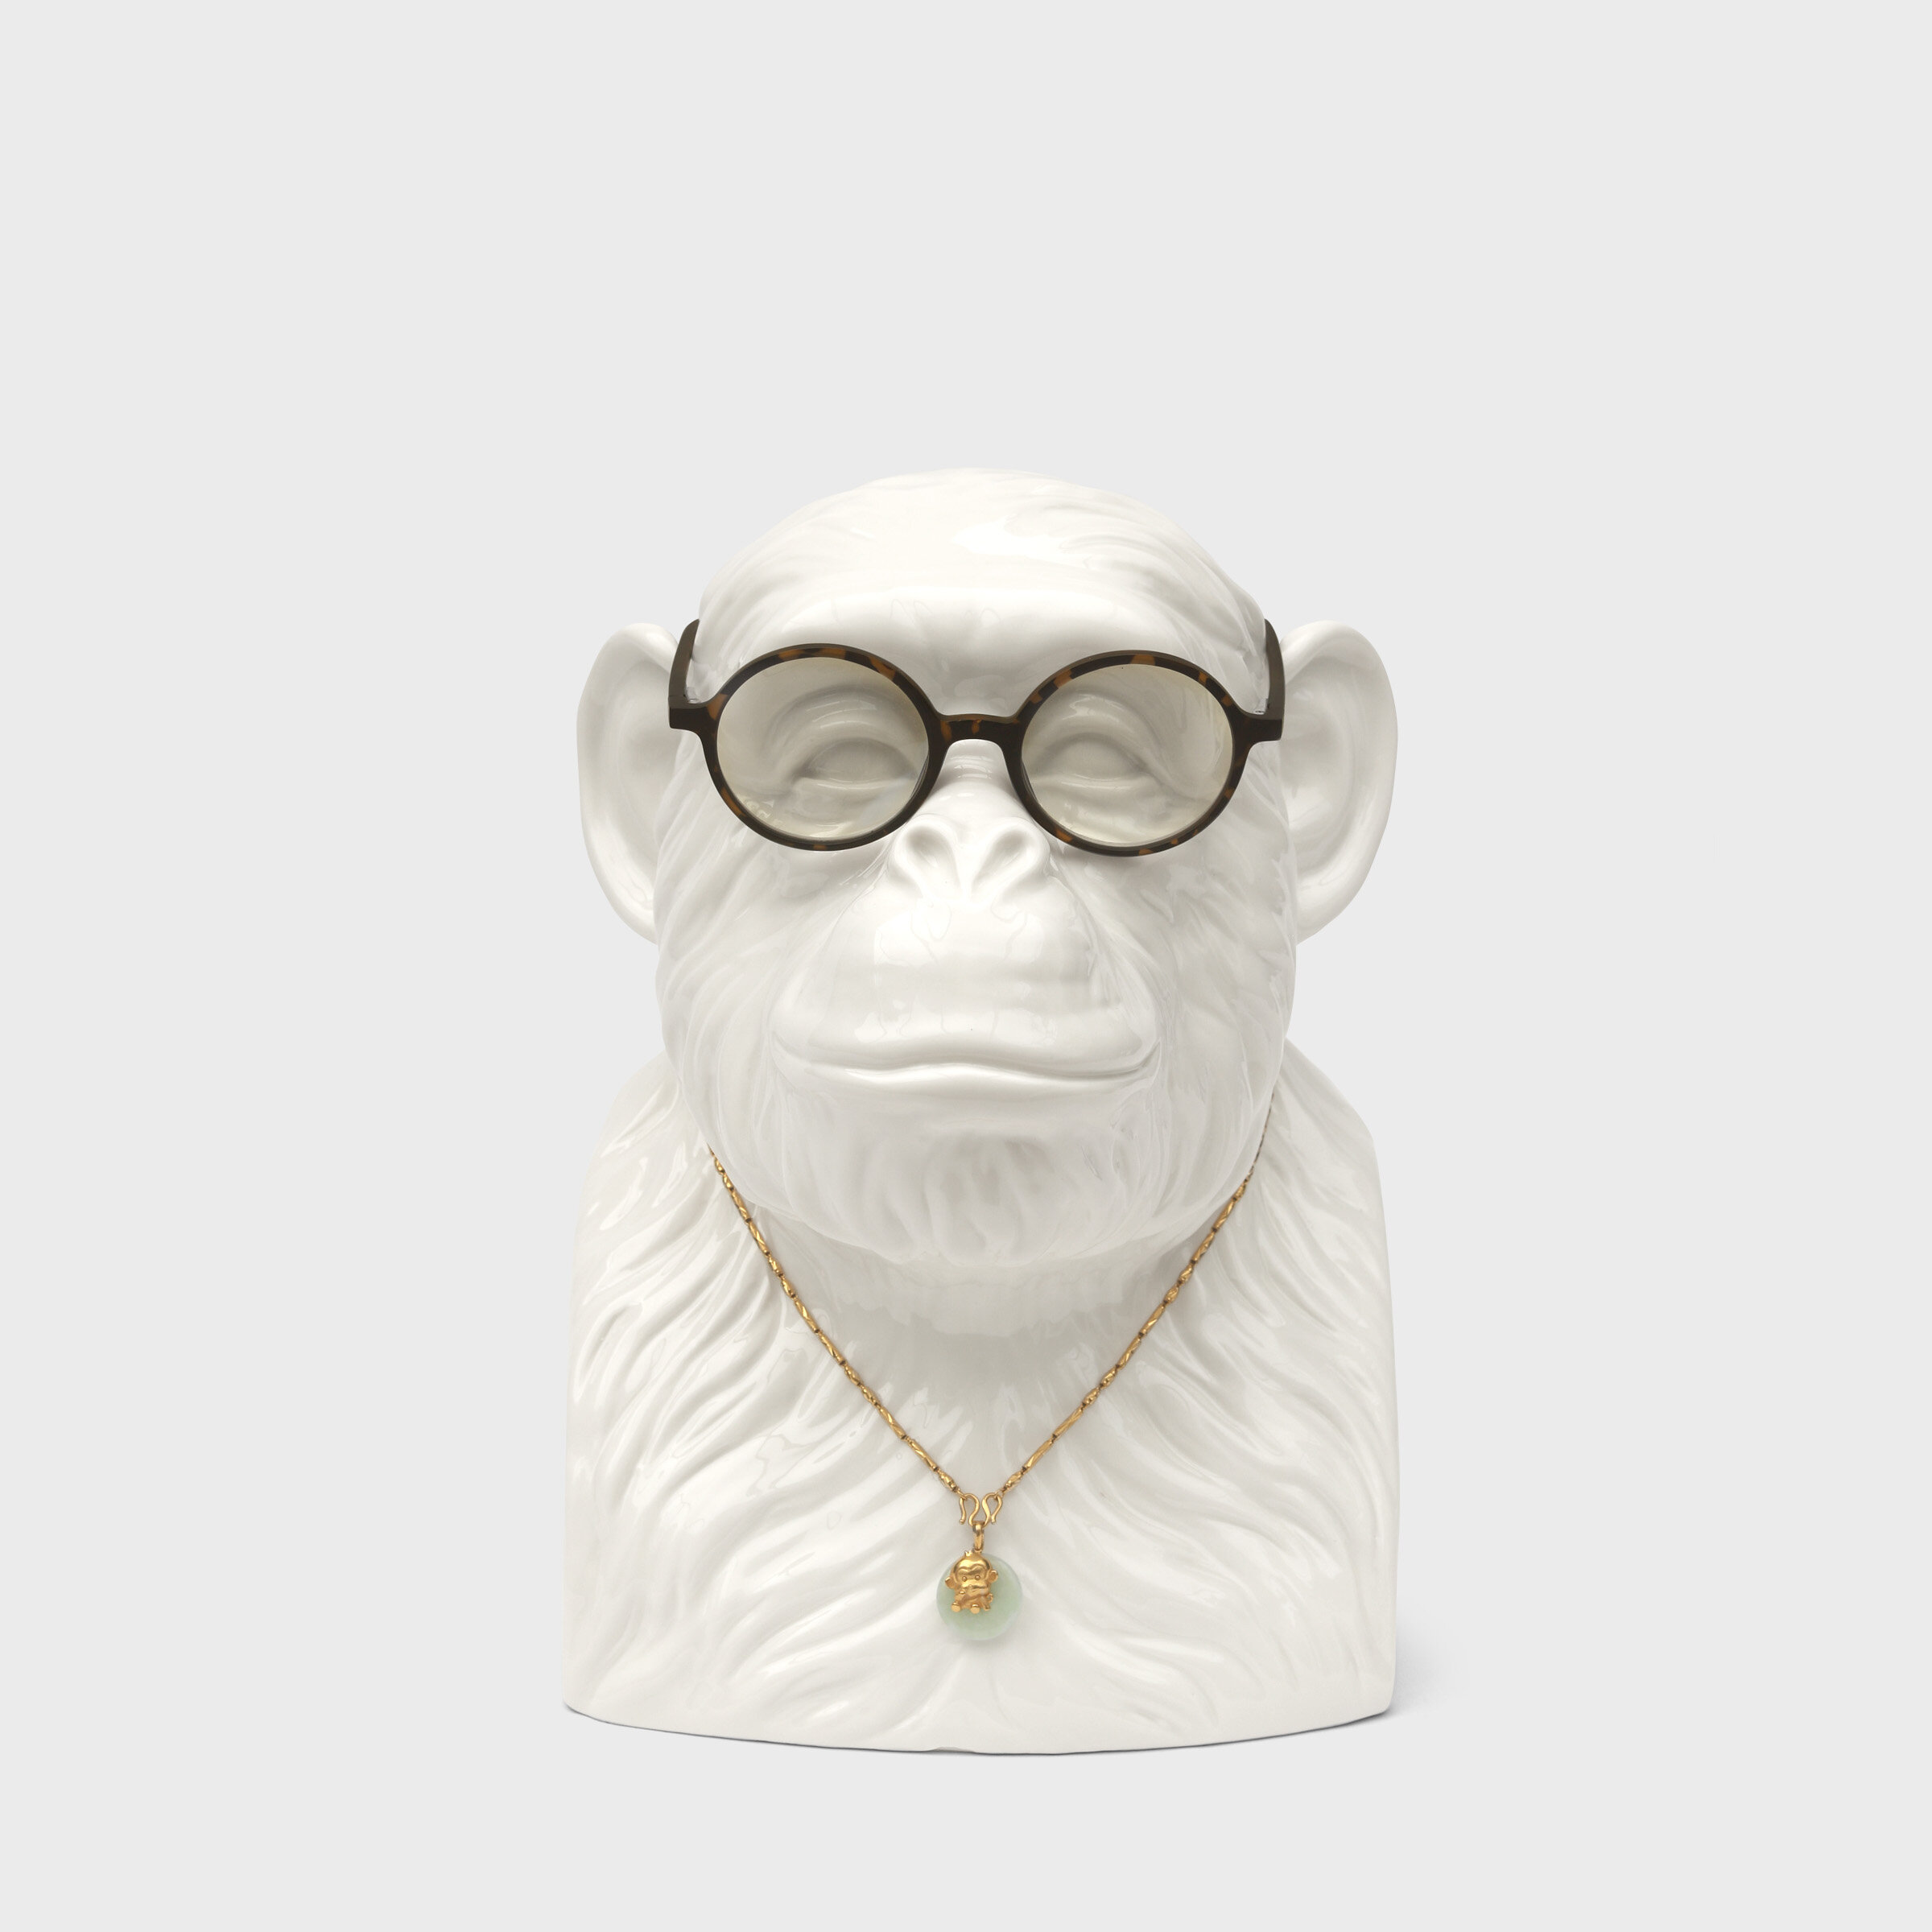 chimp with glasses and necklace